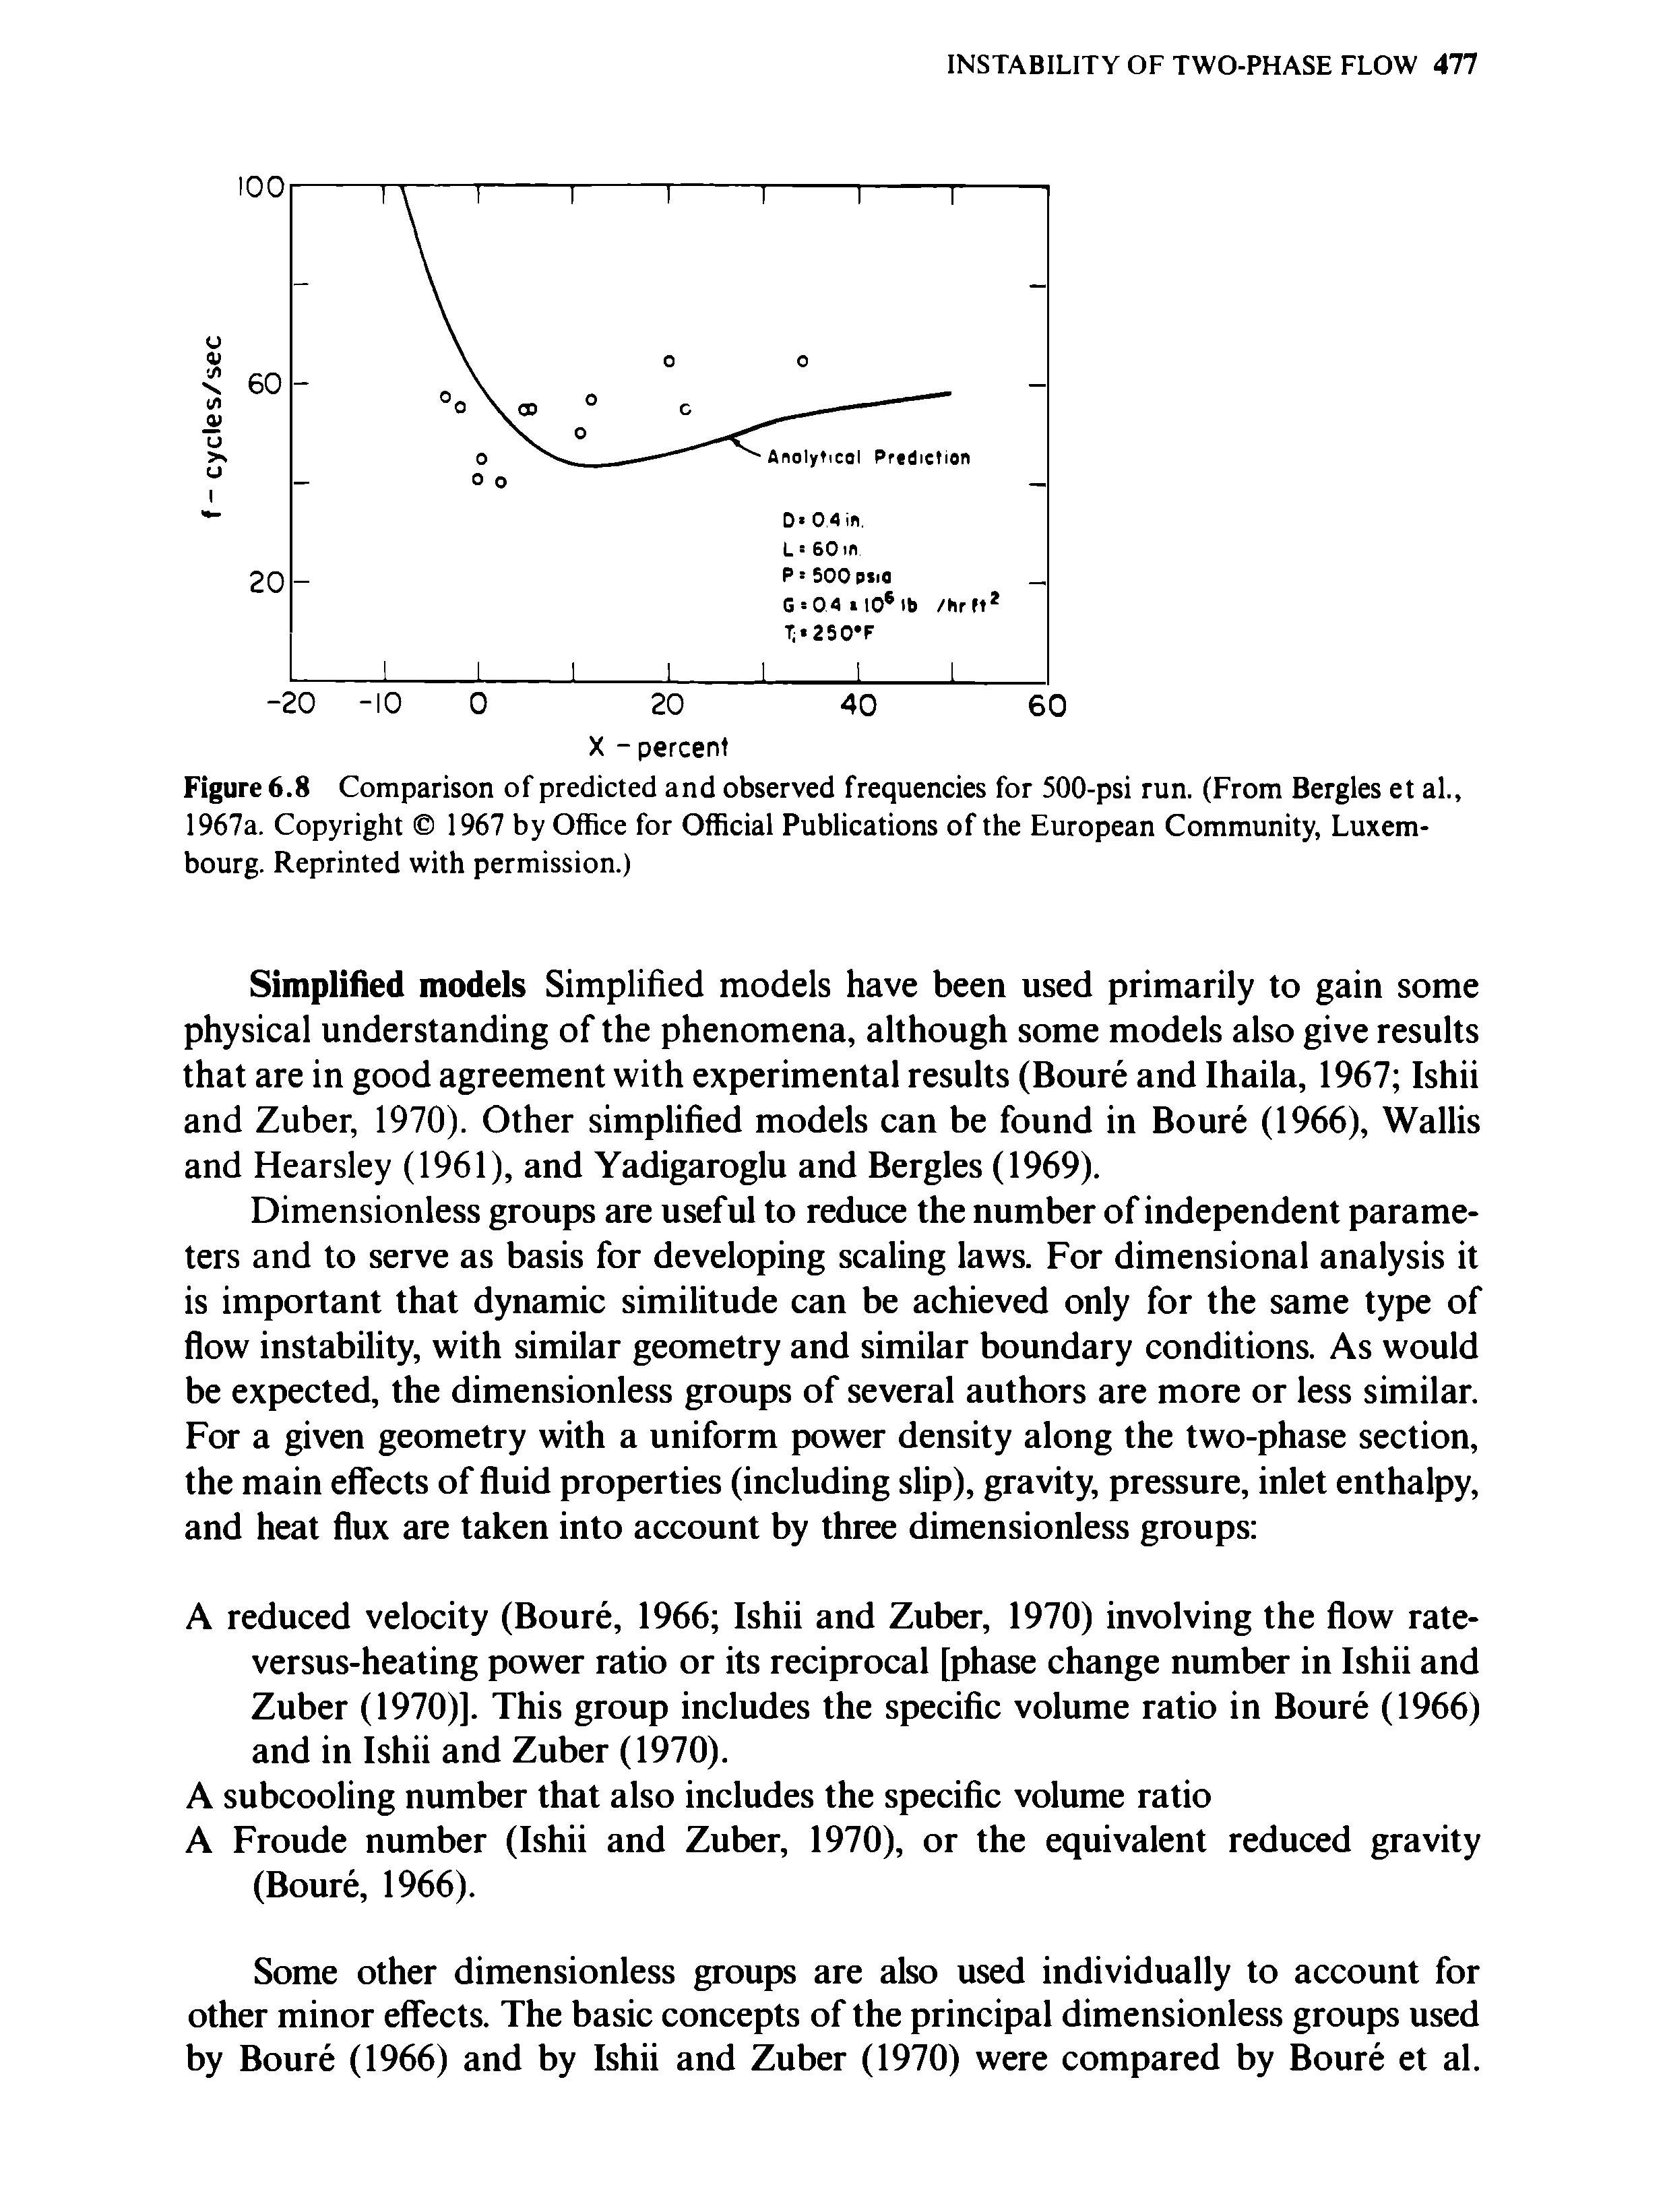 Figure 6.8 Comparison of predicted and observed frequencies for 500-psi run. (From Bergles et al., 1967a. Copyright 1967 by Office for Official Publications of the European Community, Luxembourg. Reprinted with permission.)...